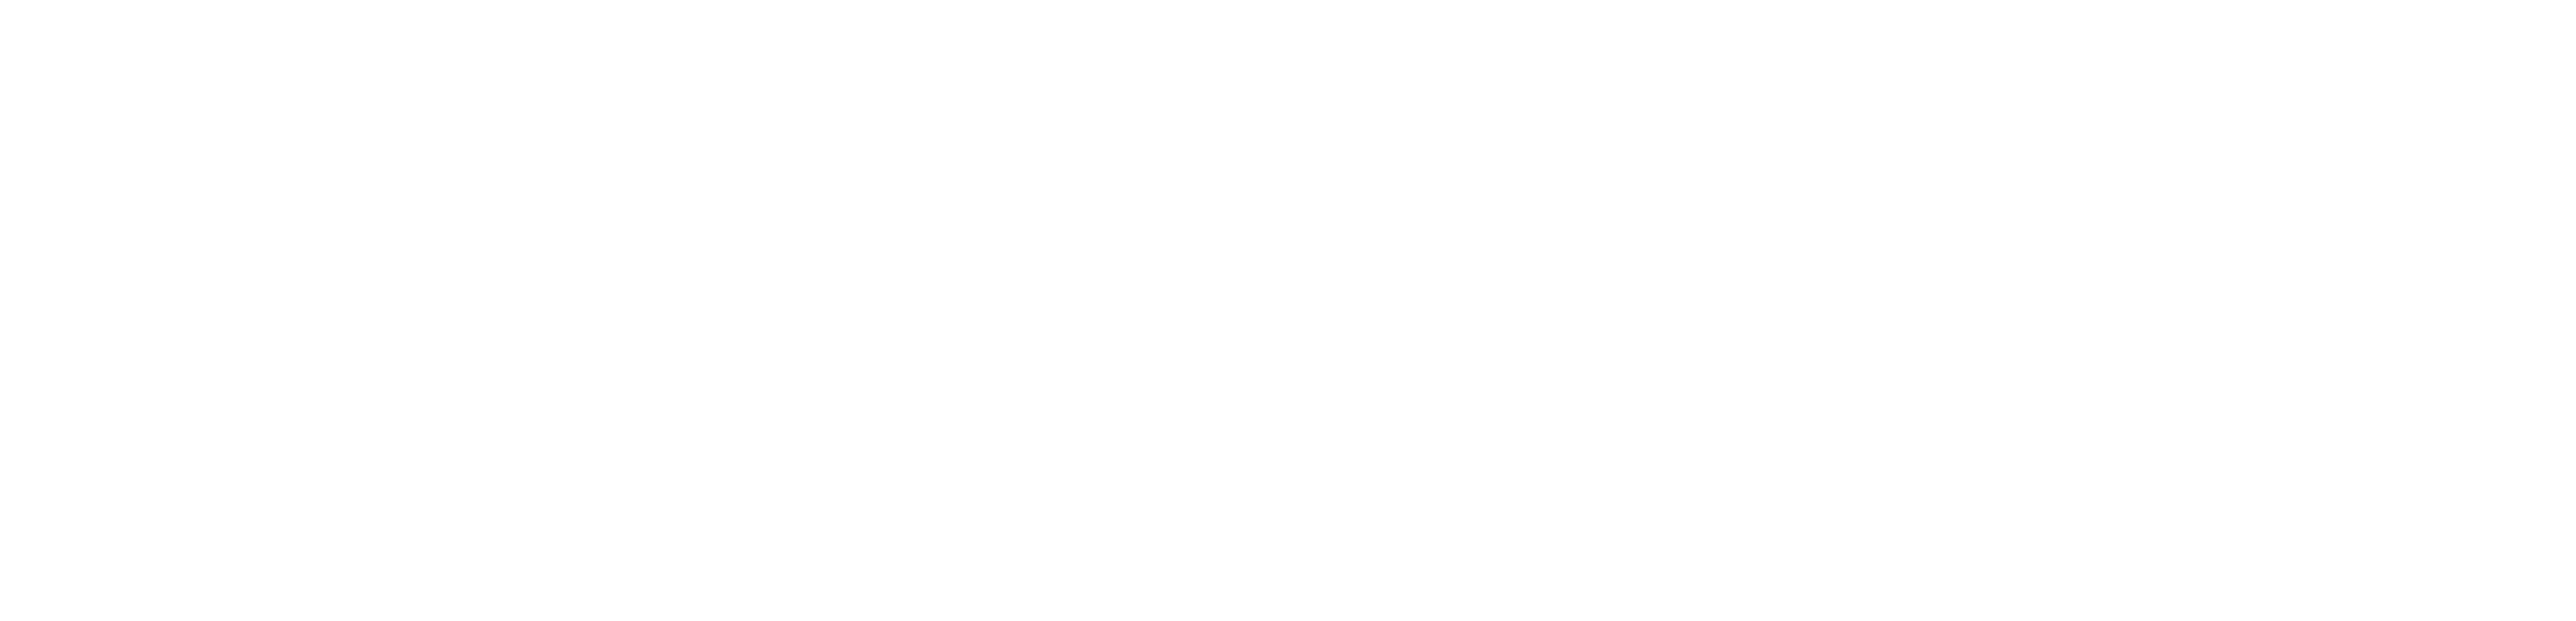 Diversity and Ability (DnA)